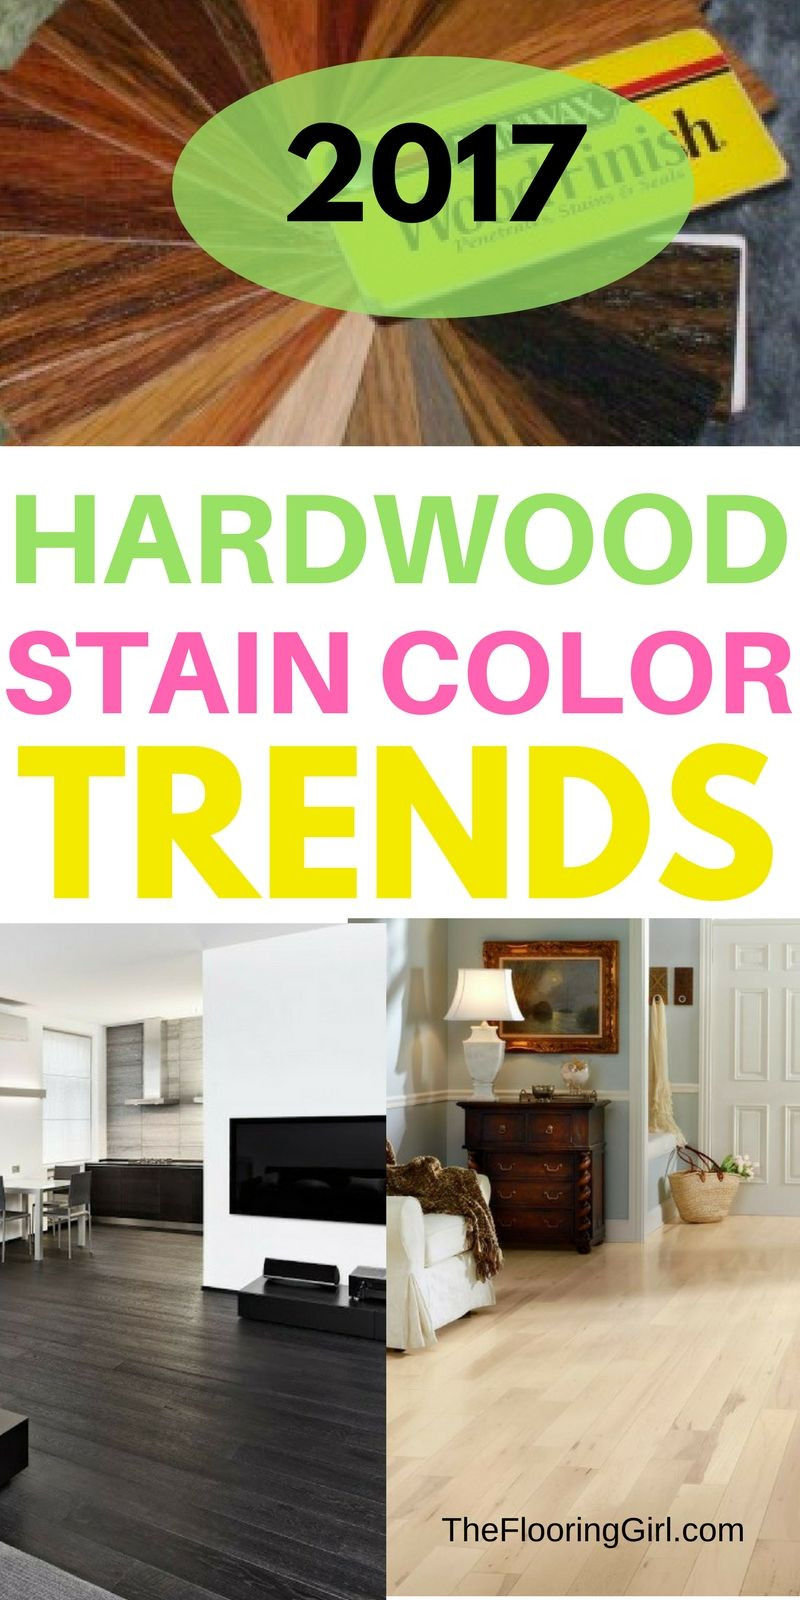 13 attractive Cost to Refinish Hardwood Floors In California 2022 free download cost to refinish hardwood floors in california of hardwood flooring stain color trends 2018 more from the flooring throughout hardwood flooring stain color trends for 2017 hardwood colors th